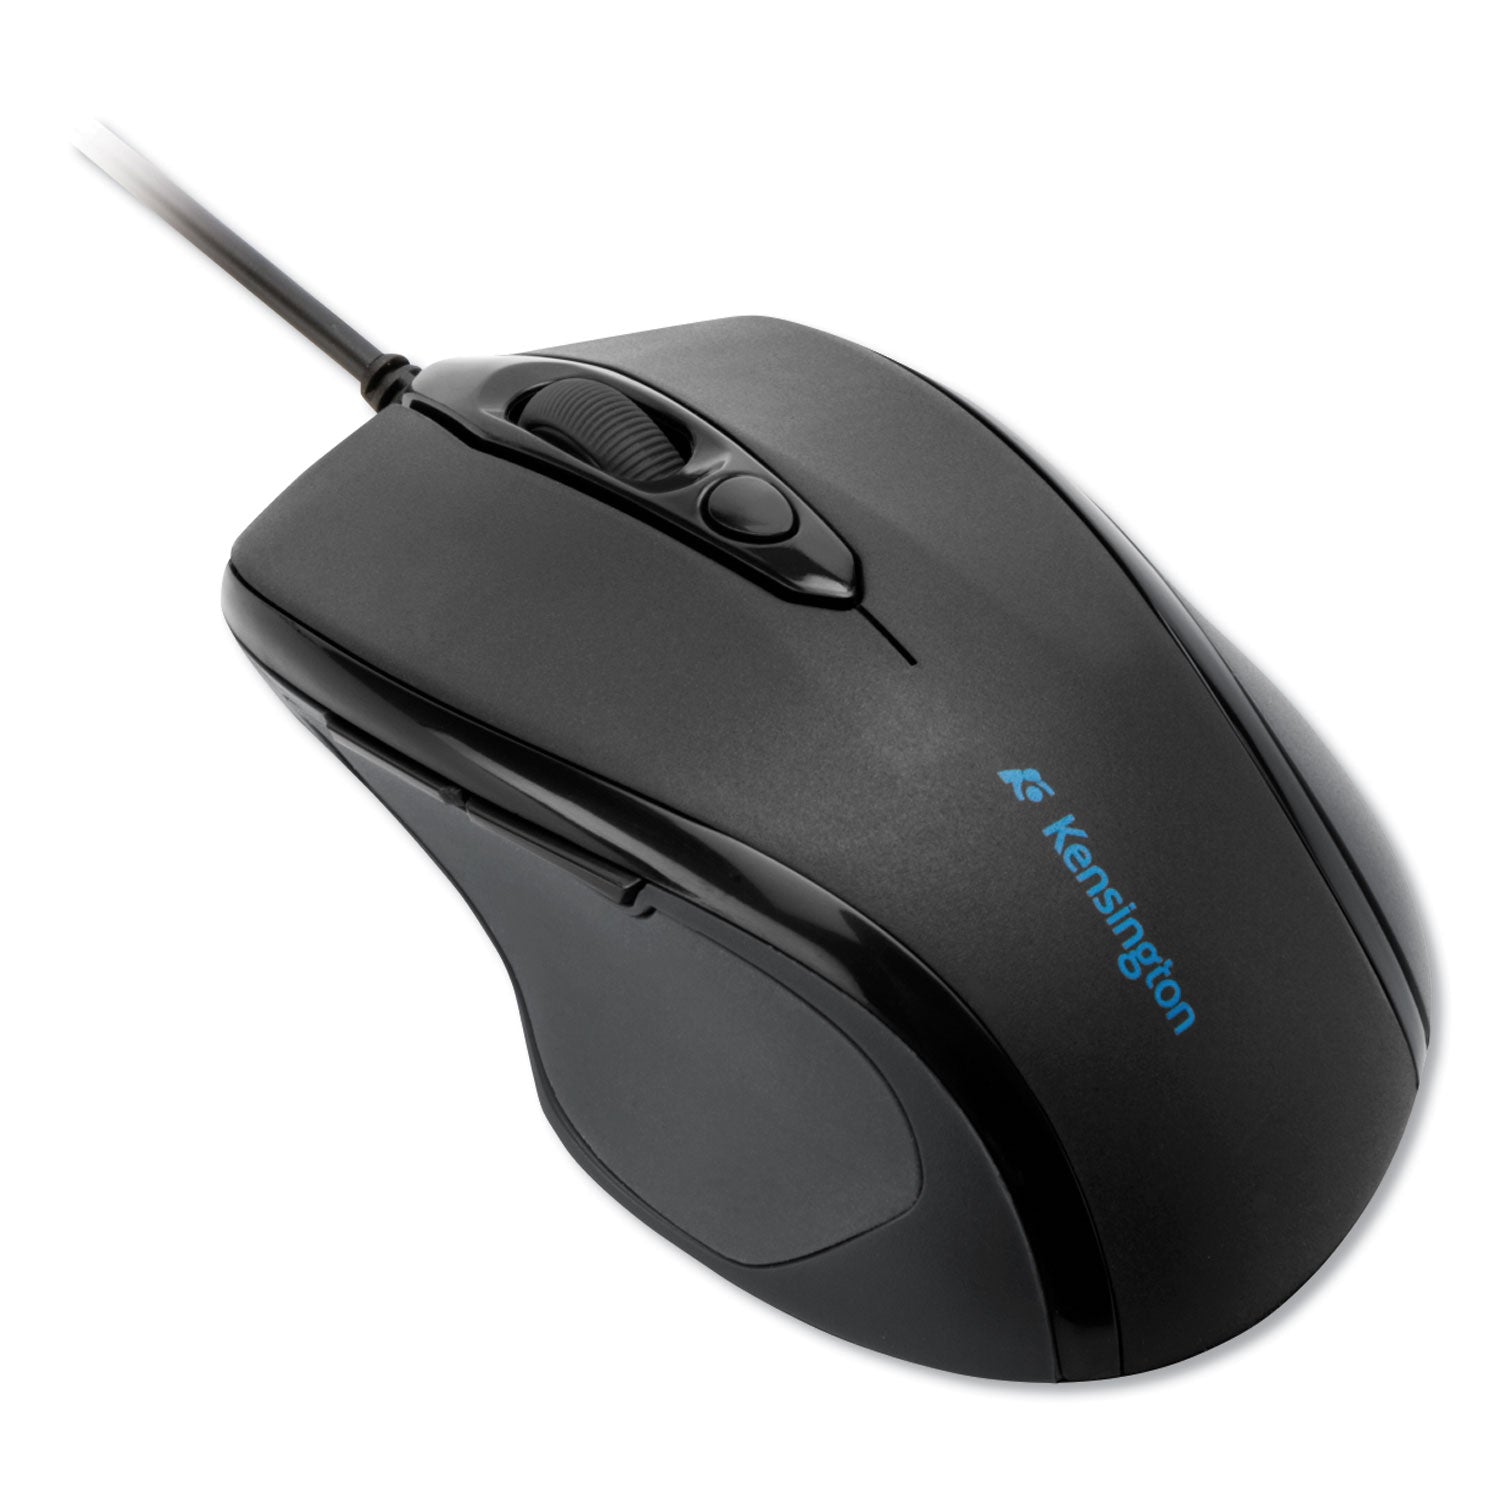 Pro Fit Wired Mid-Size Mouse, USB 2.0, Right Hand Use, Black - 